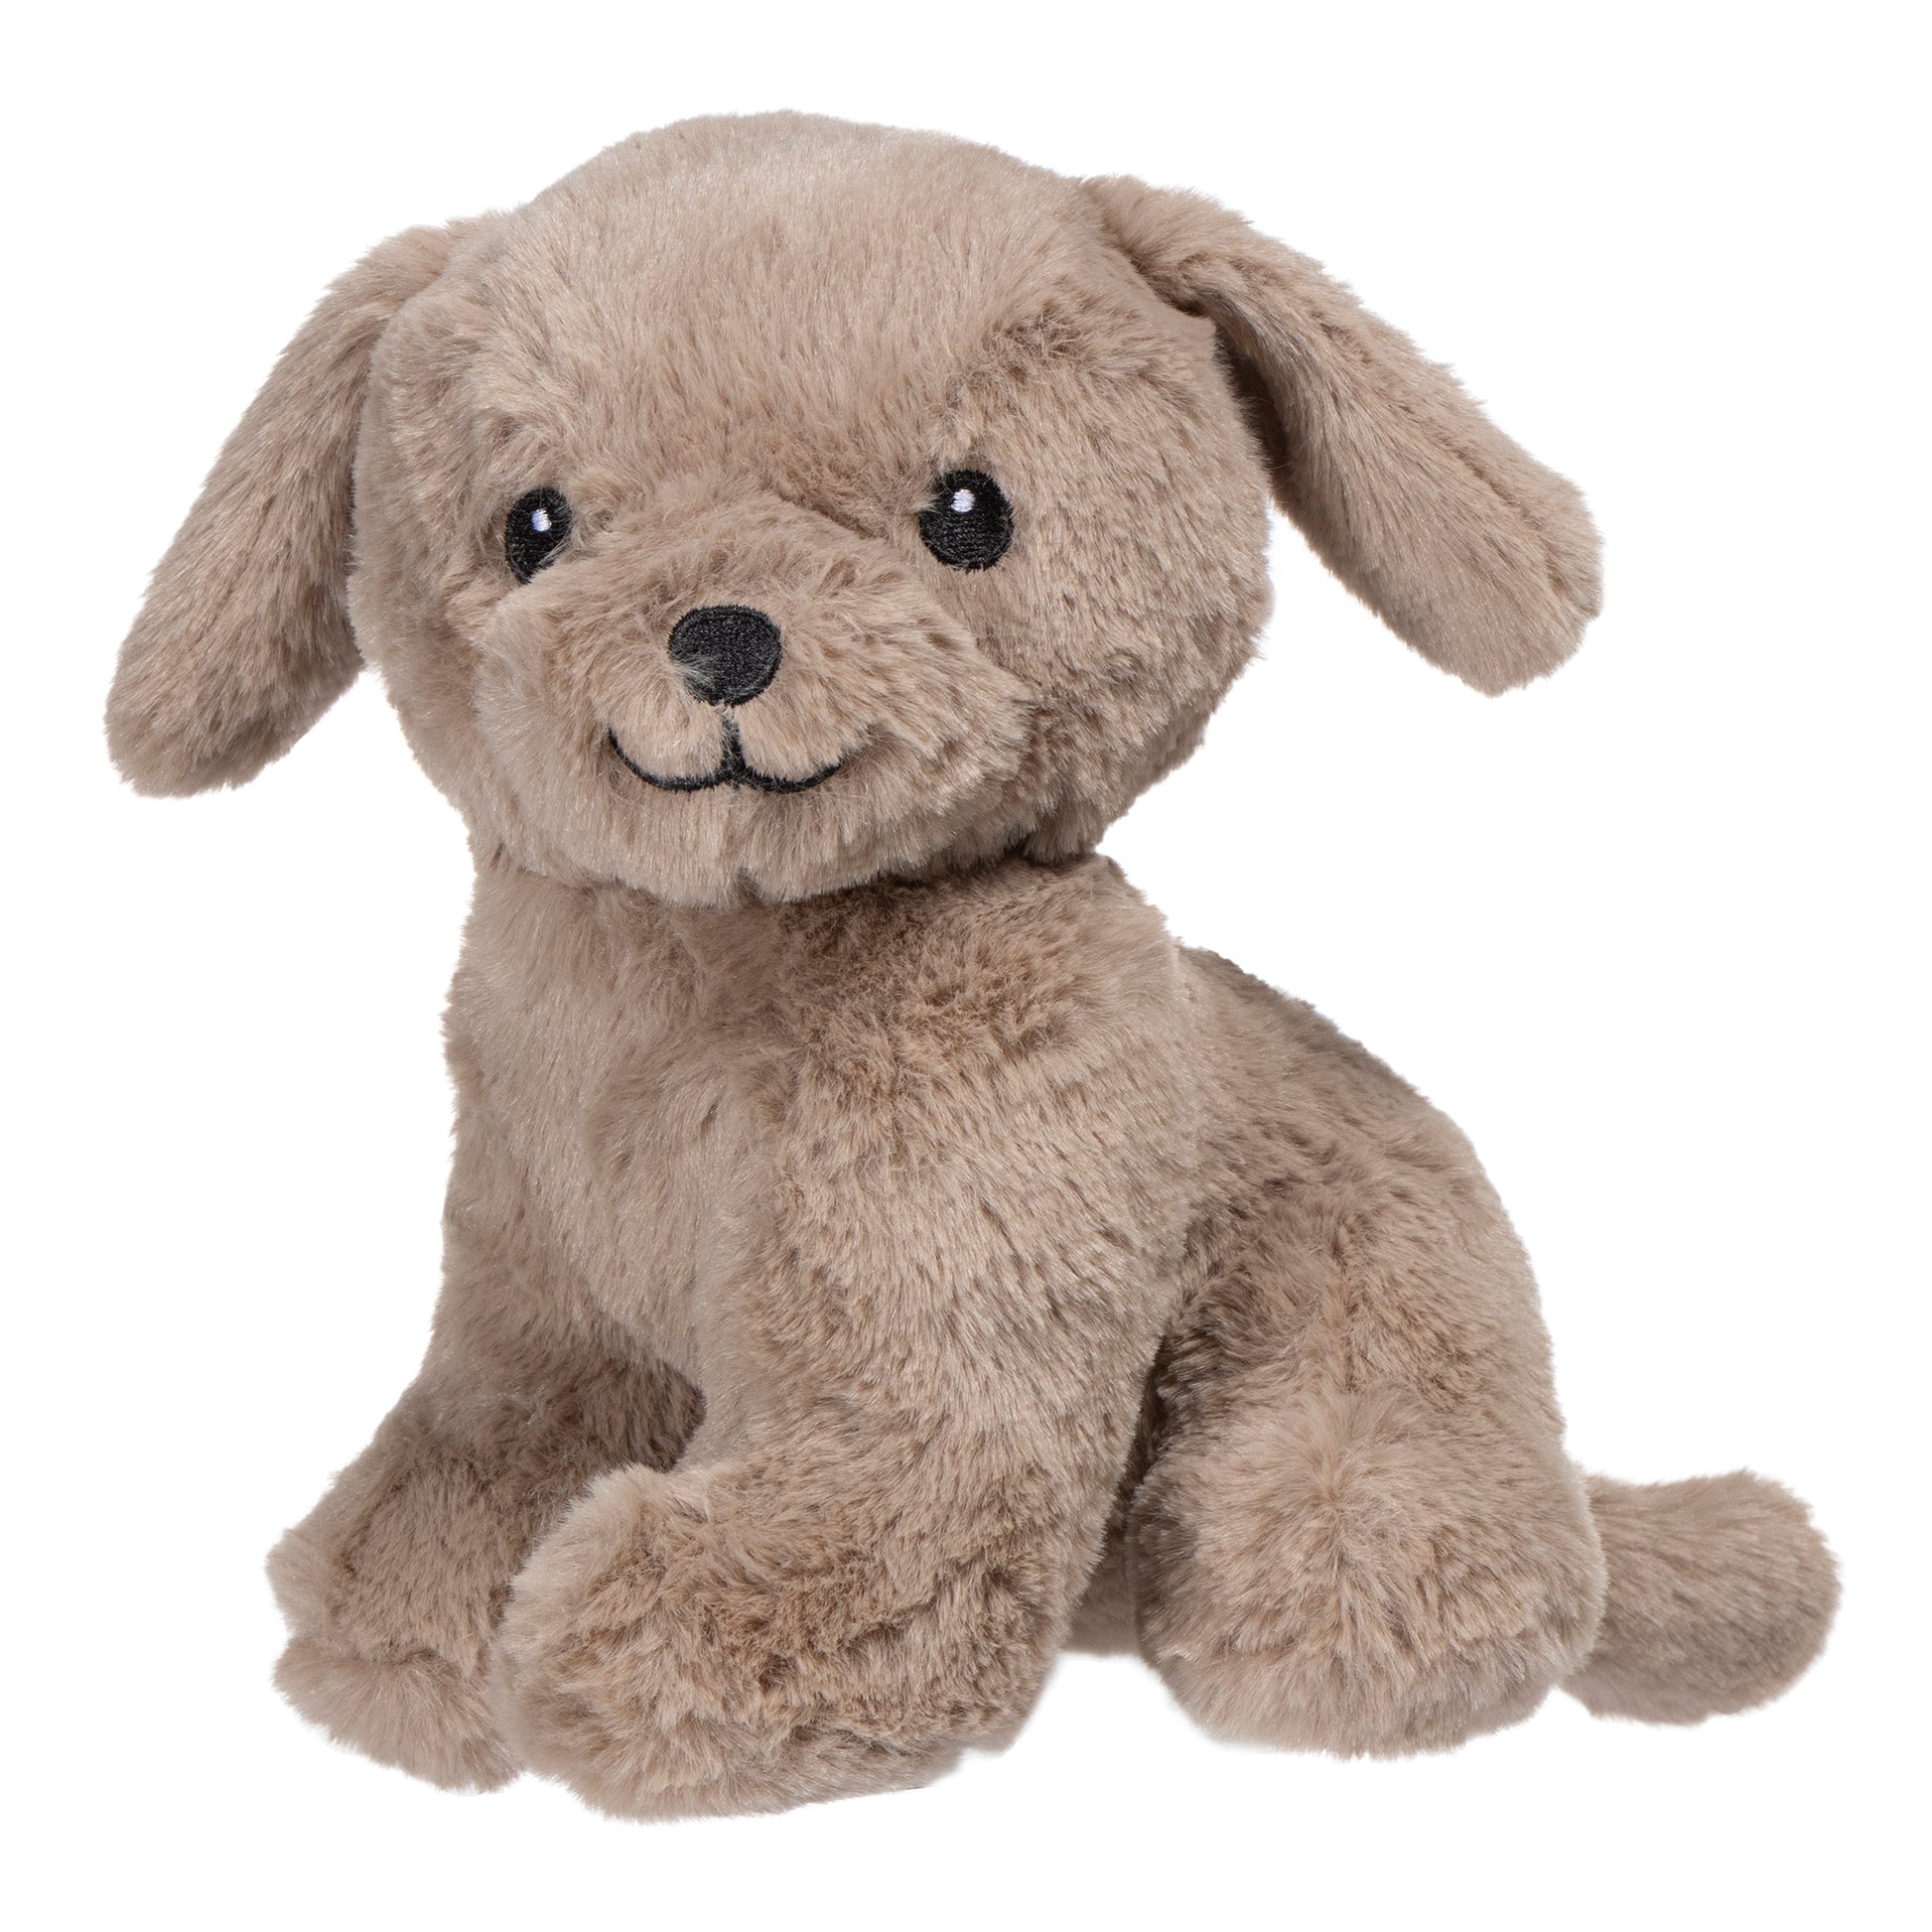 Dog plush toy is made of soft plush with a natural brown body, black embroidered face and measures 9 inches tall.